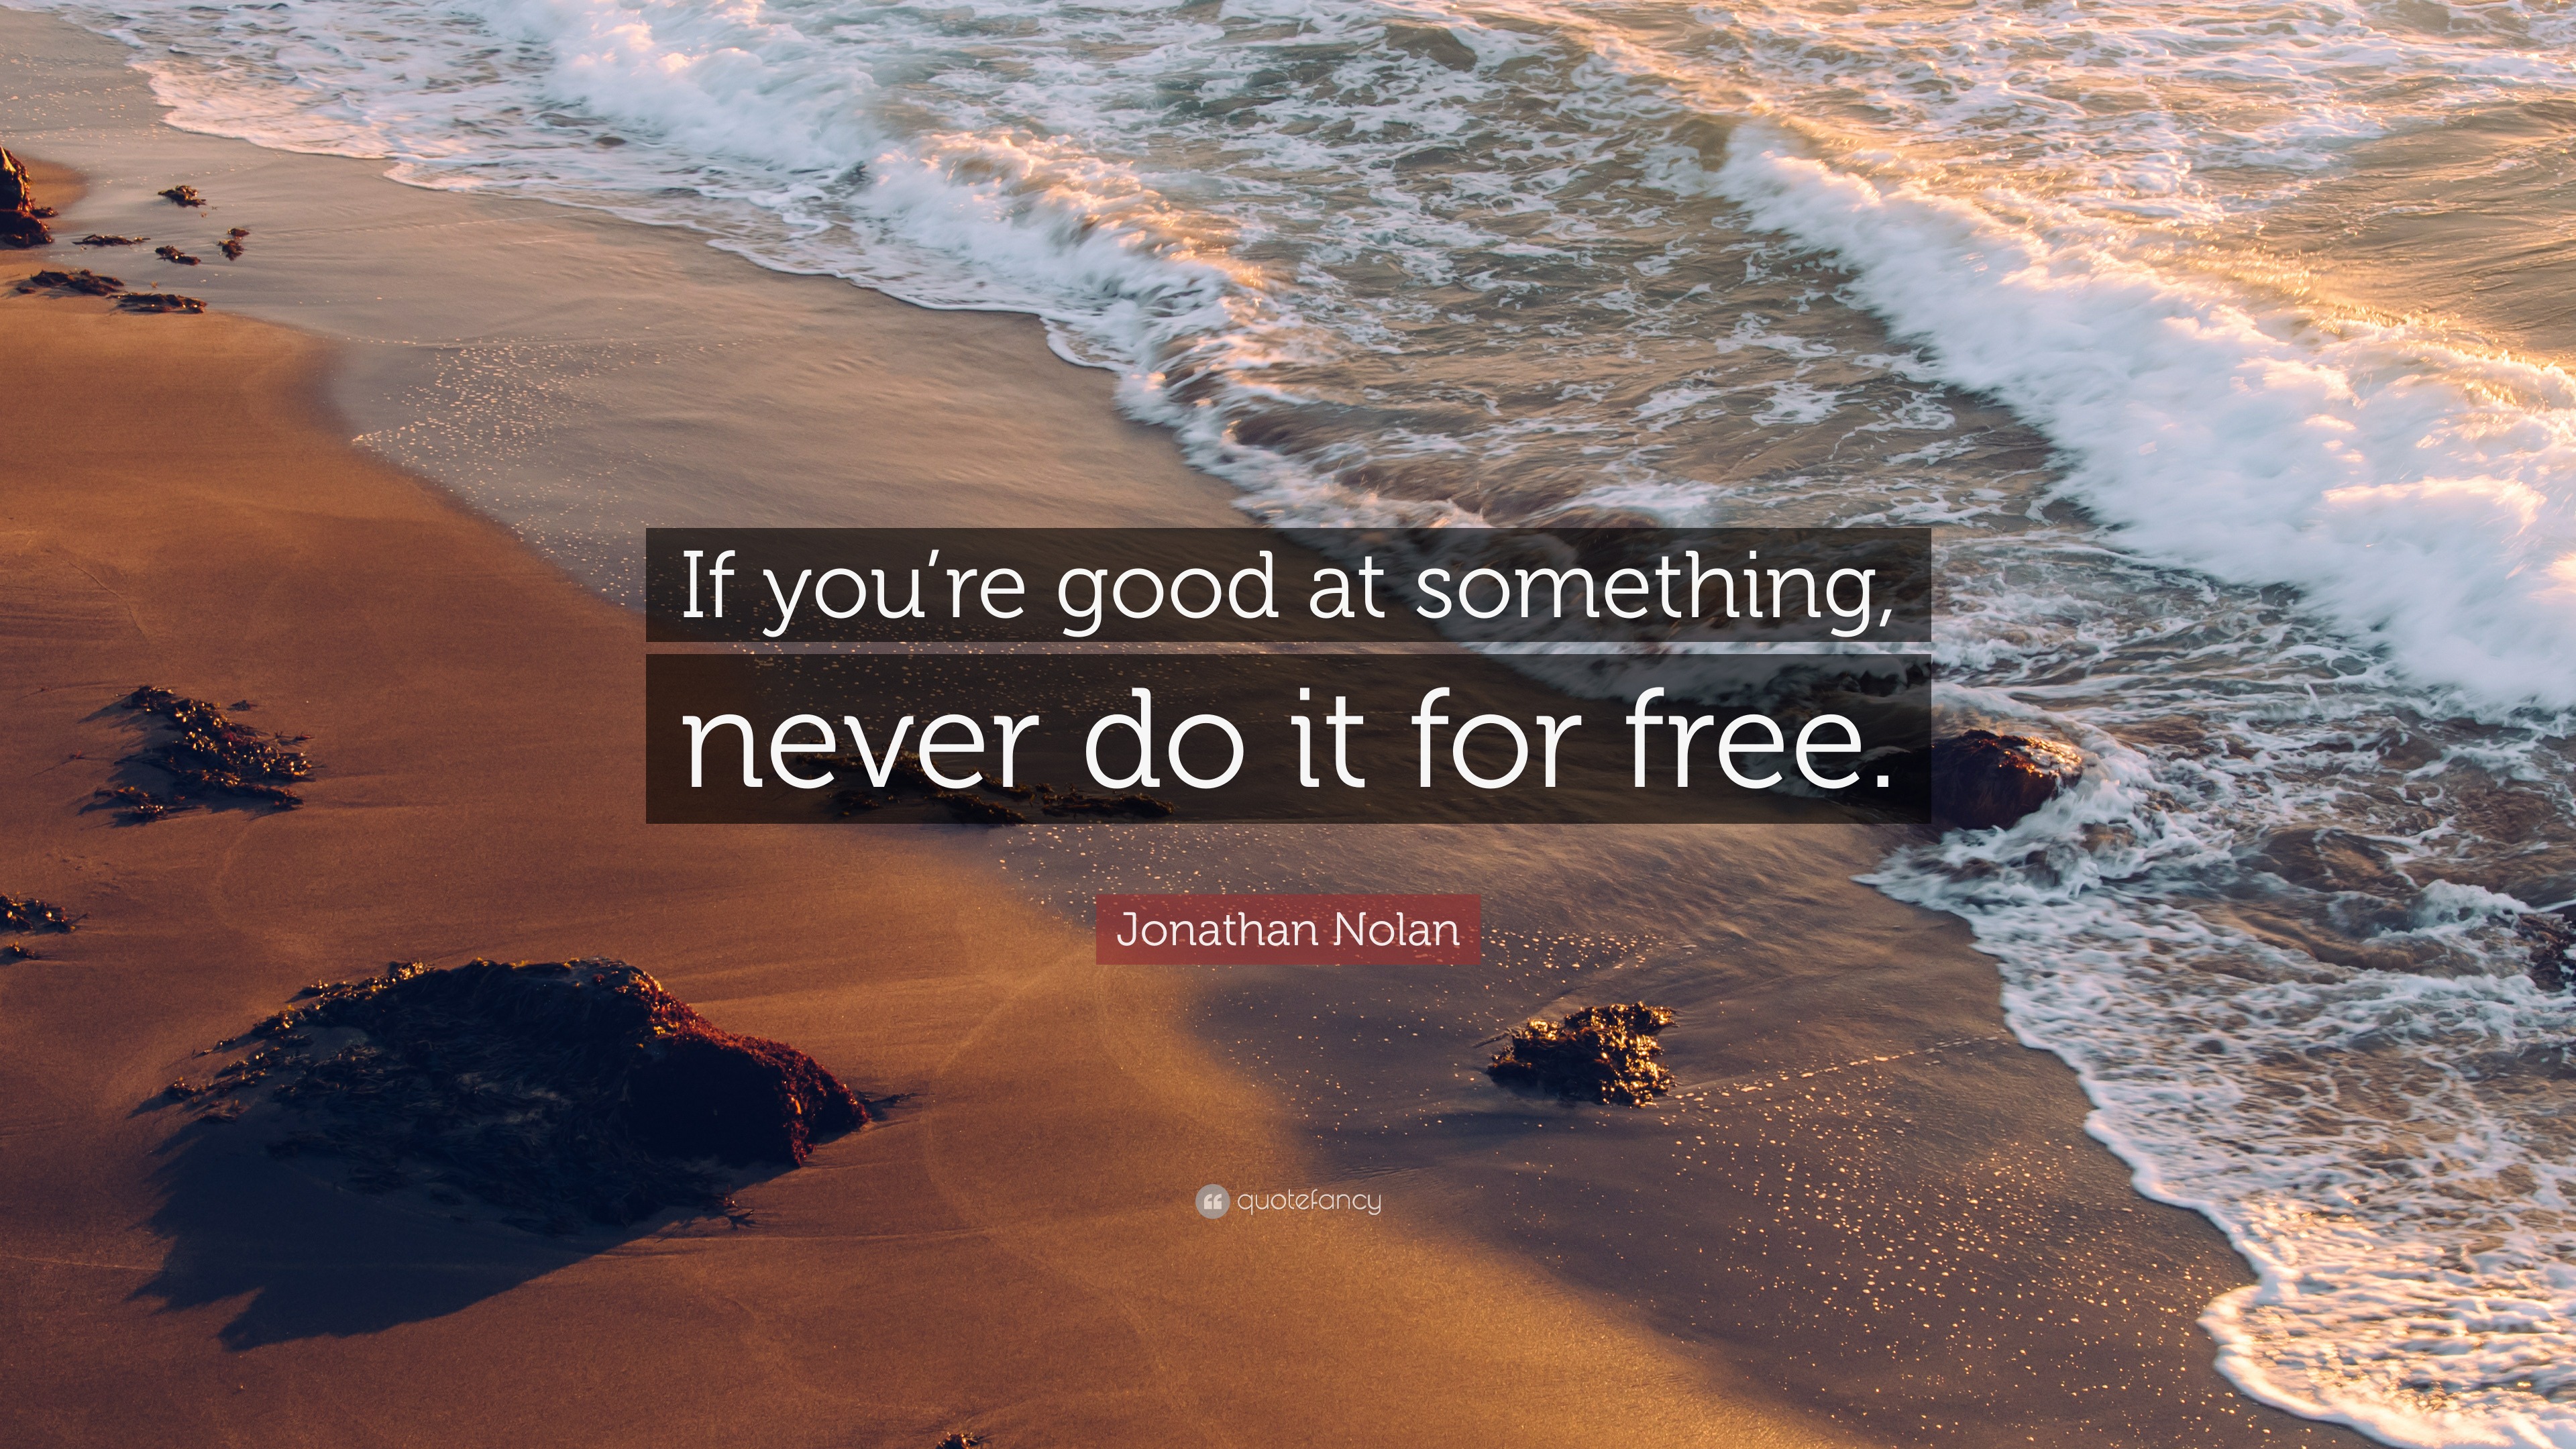 Jonathan Nolan Quote: “If you’re good at something, never do it for